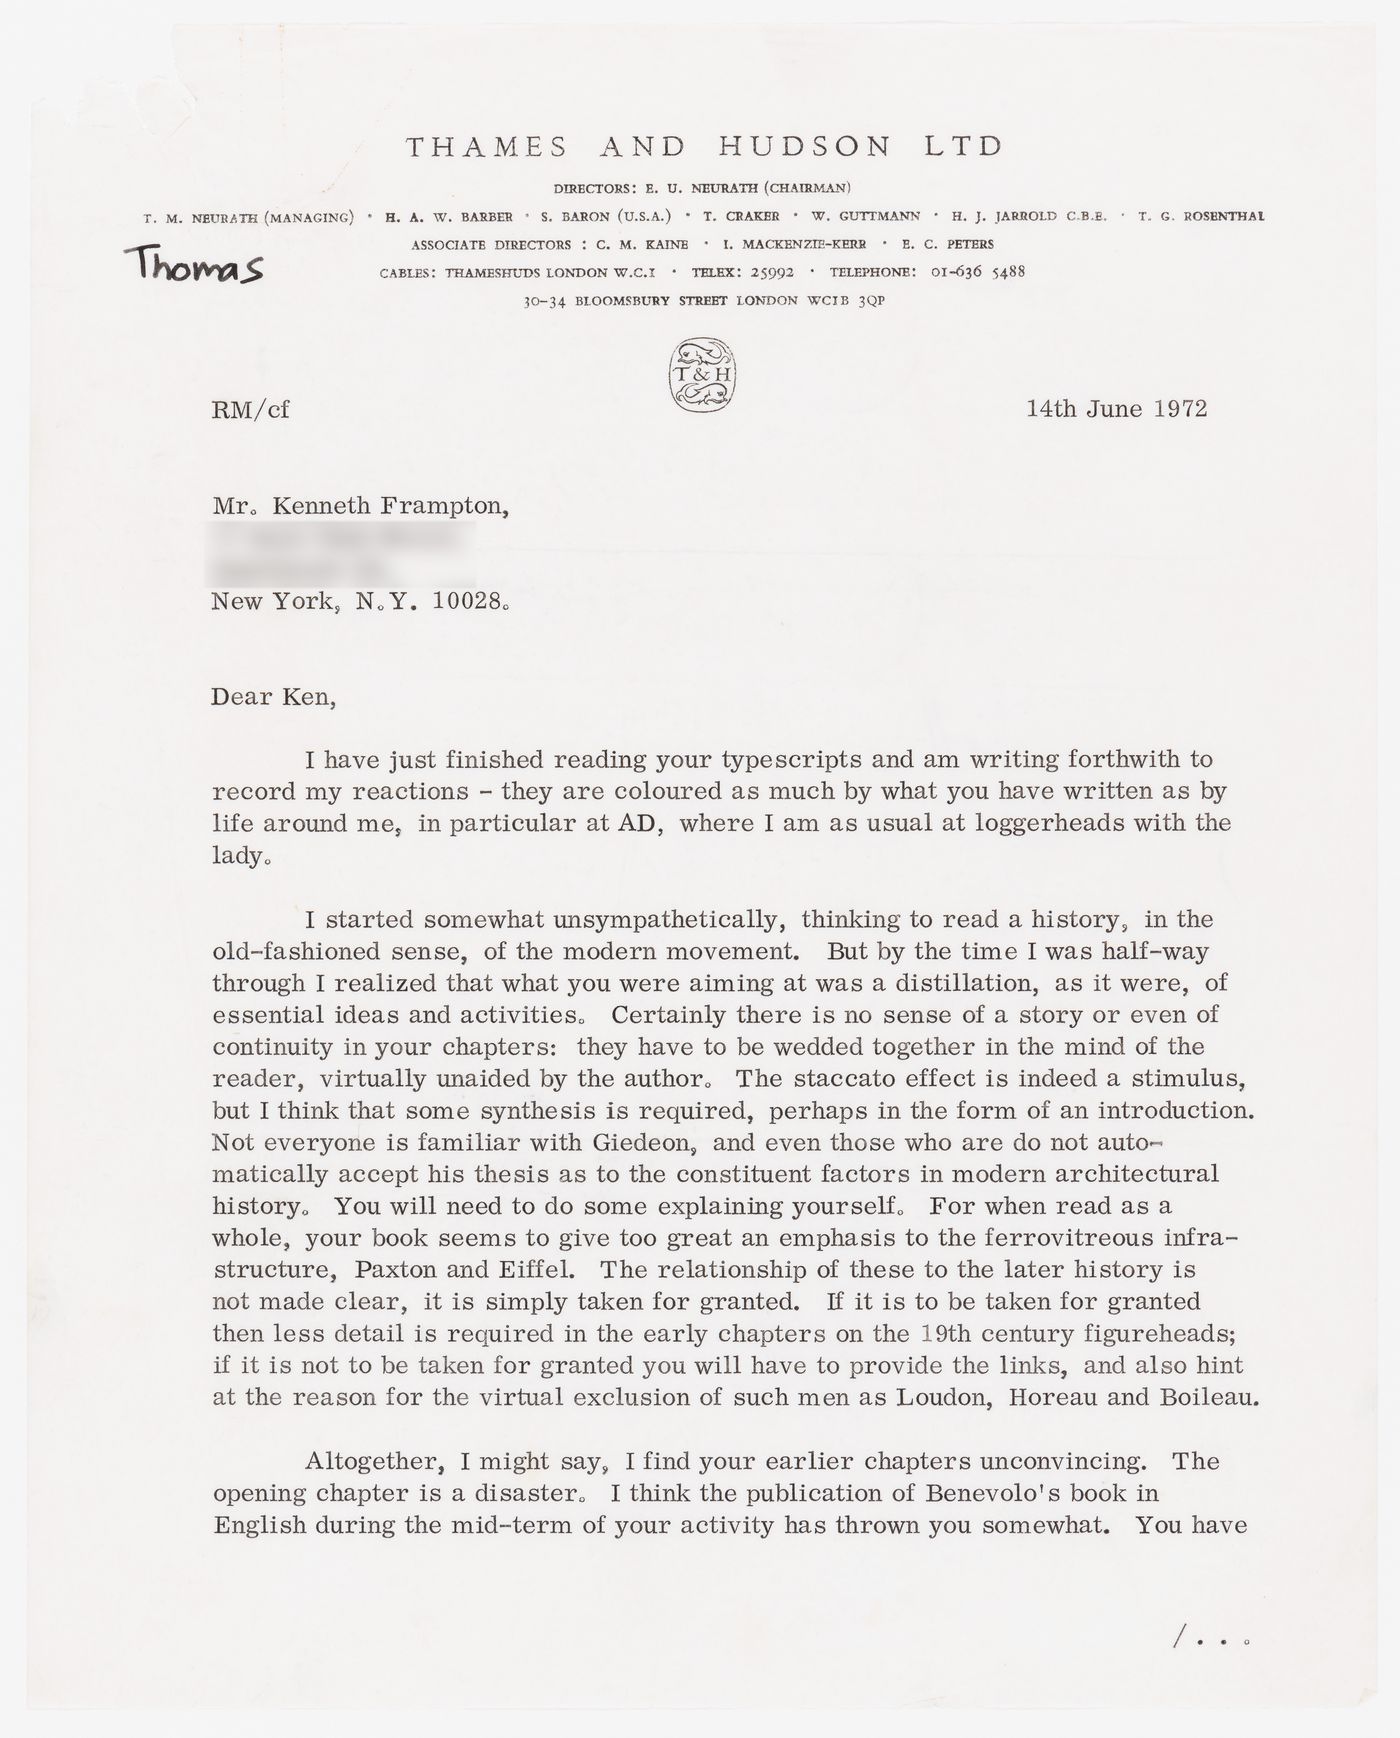 Letter from Robin Middleton to Kenneth Frampton with comments about "Modern Architecture: A Critical History"